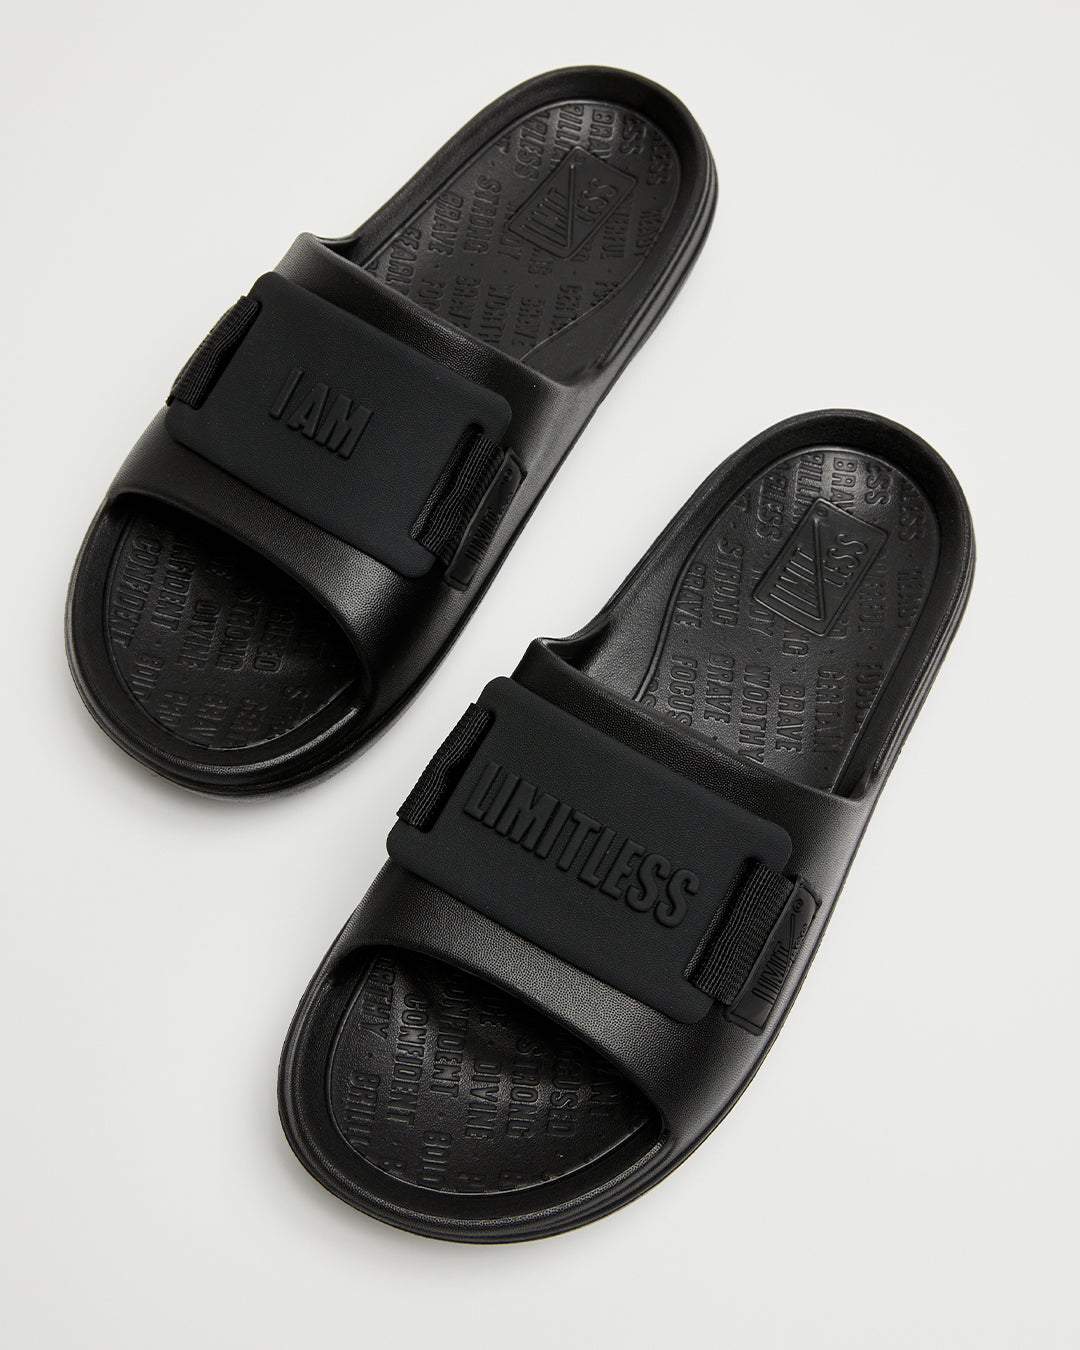 LIMITLESS SLIDES™ WITH ESSENTIAL TIBAH™ QUAD - ANCHOR BAY HIGH SCHOOL EDITION